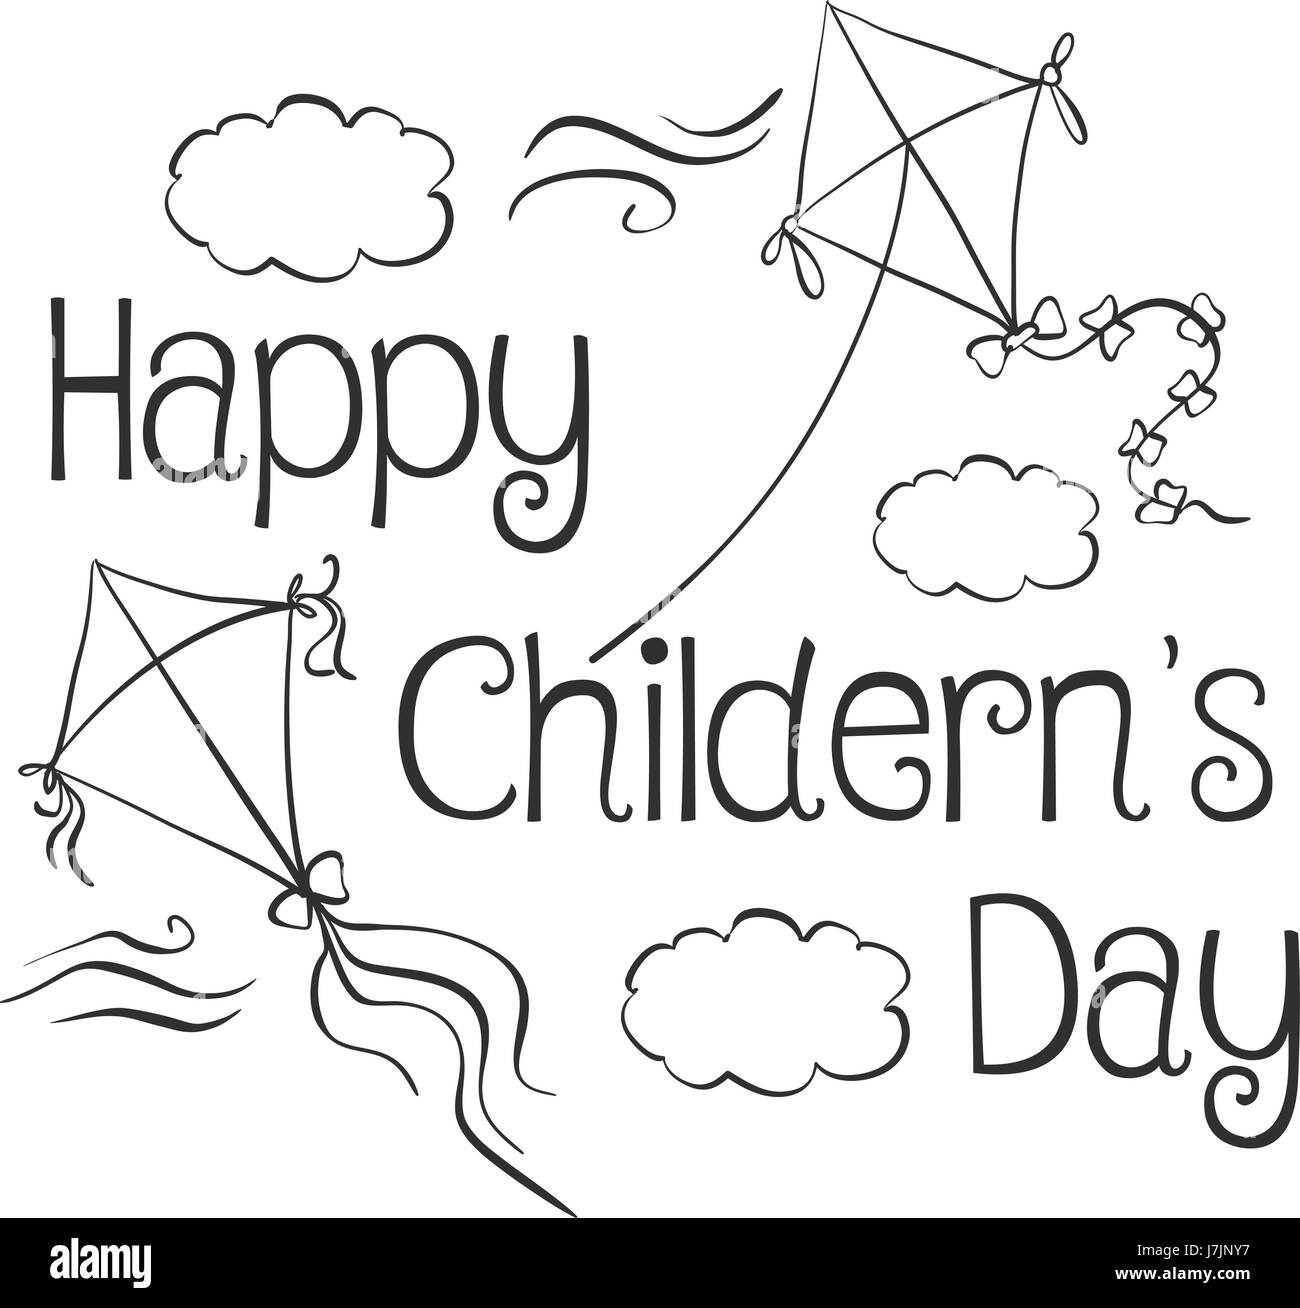 Happy Childrens Day Doodle Holiday Illustration To The International Childrens  Day Children Art Style Drawing With Colored Pencils Sketch Stock  Illustration - Download Image Now - iStock